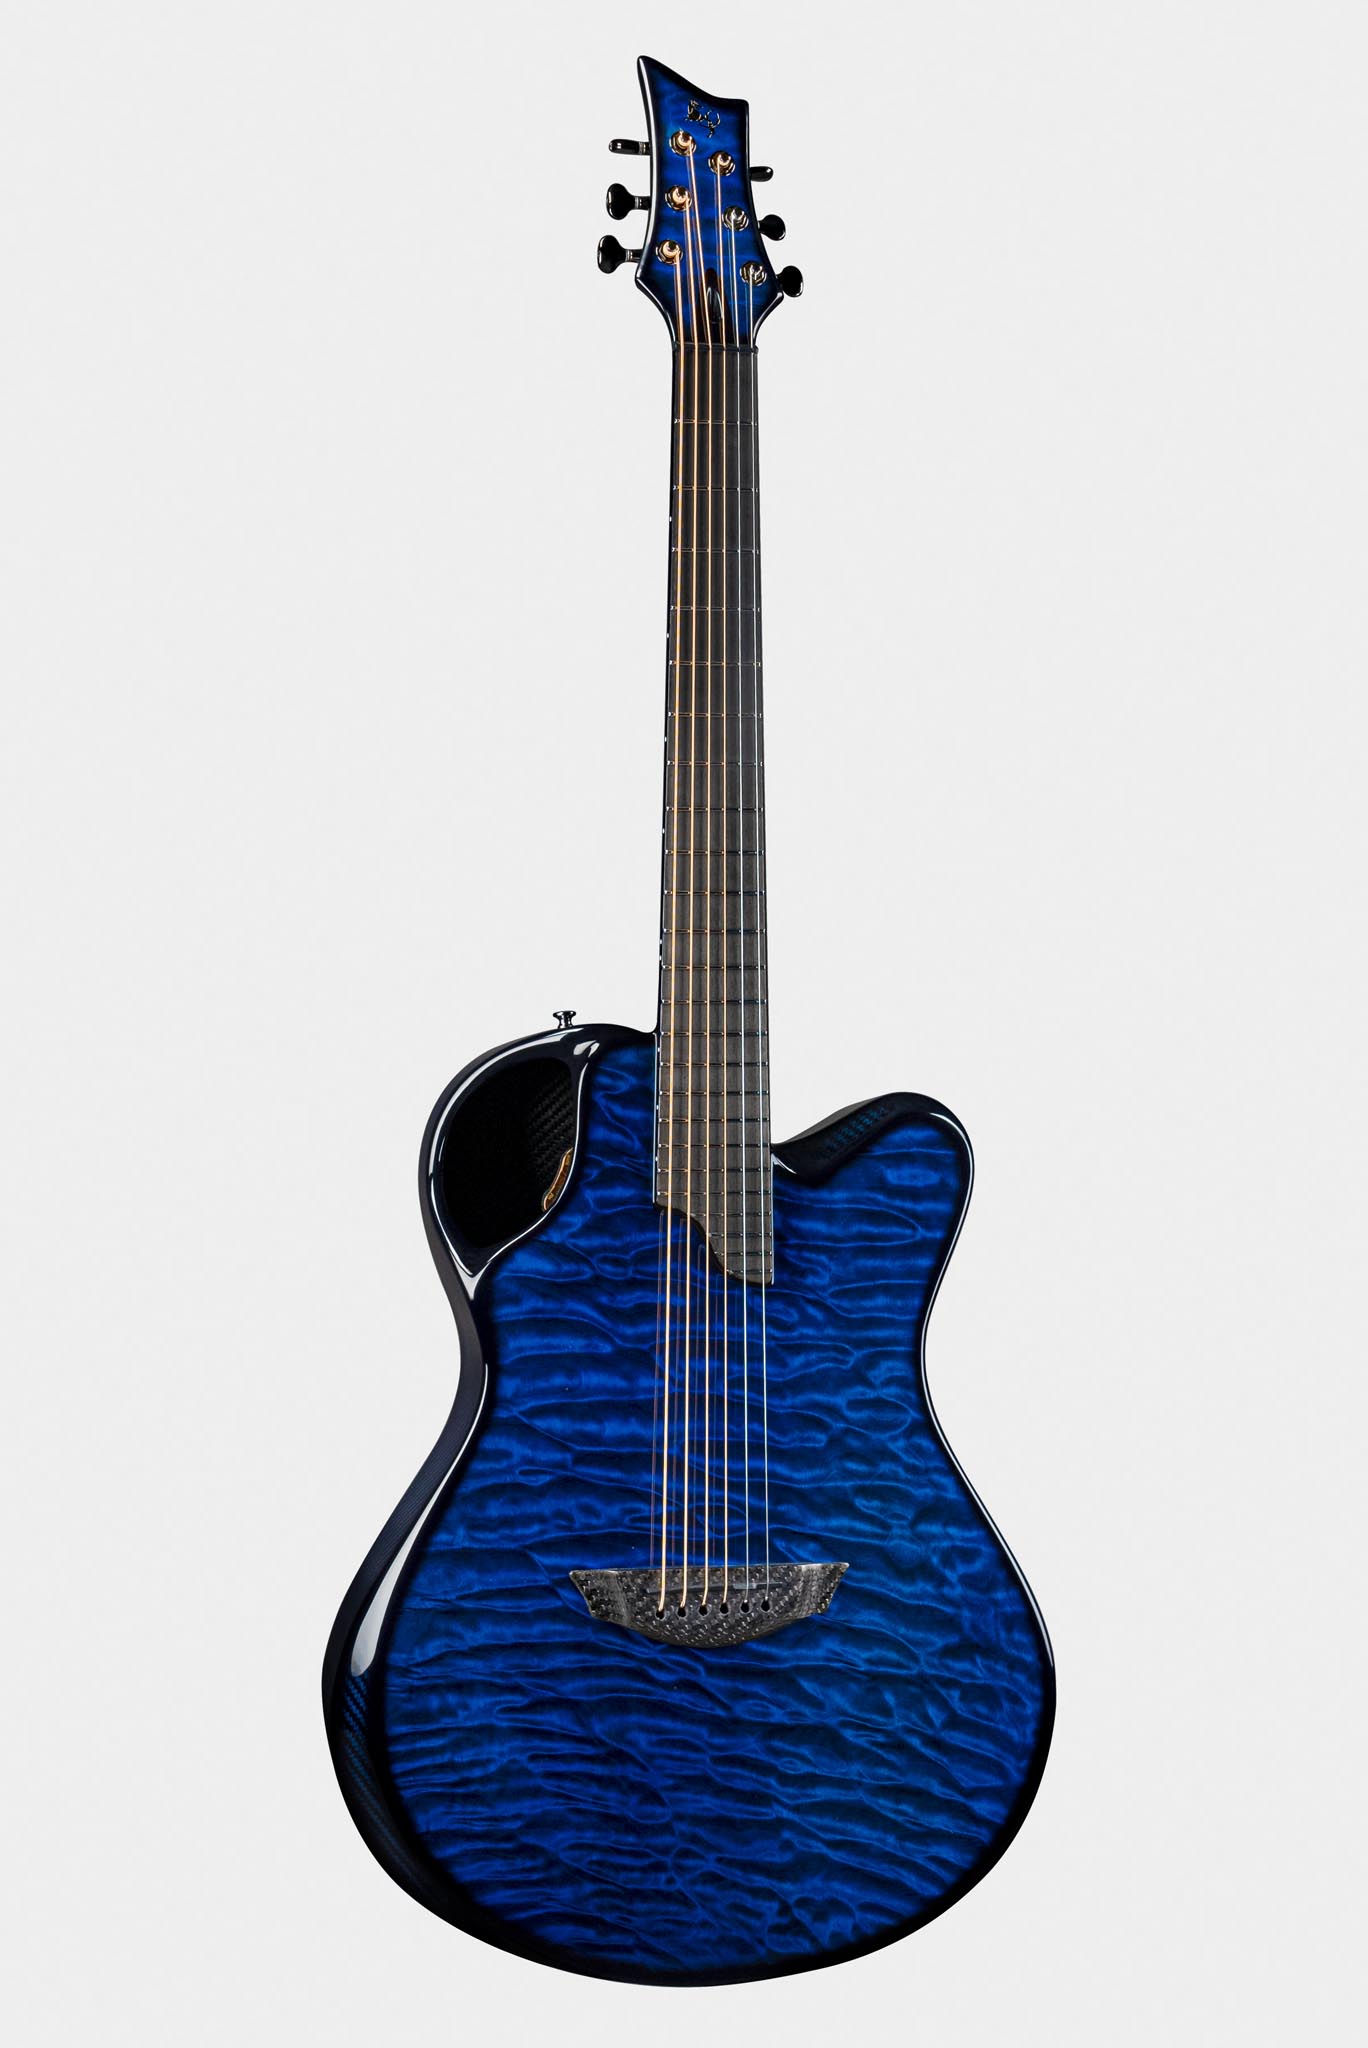 Emerald Guitars X20 model featuring a vibrant blue Quilted Maple finish and black hardware